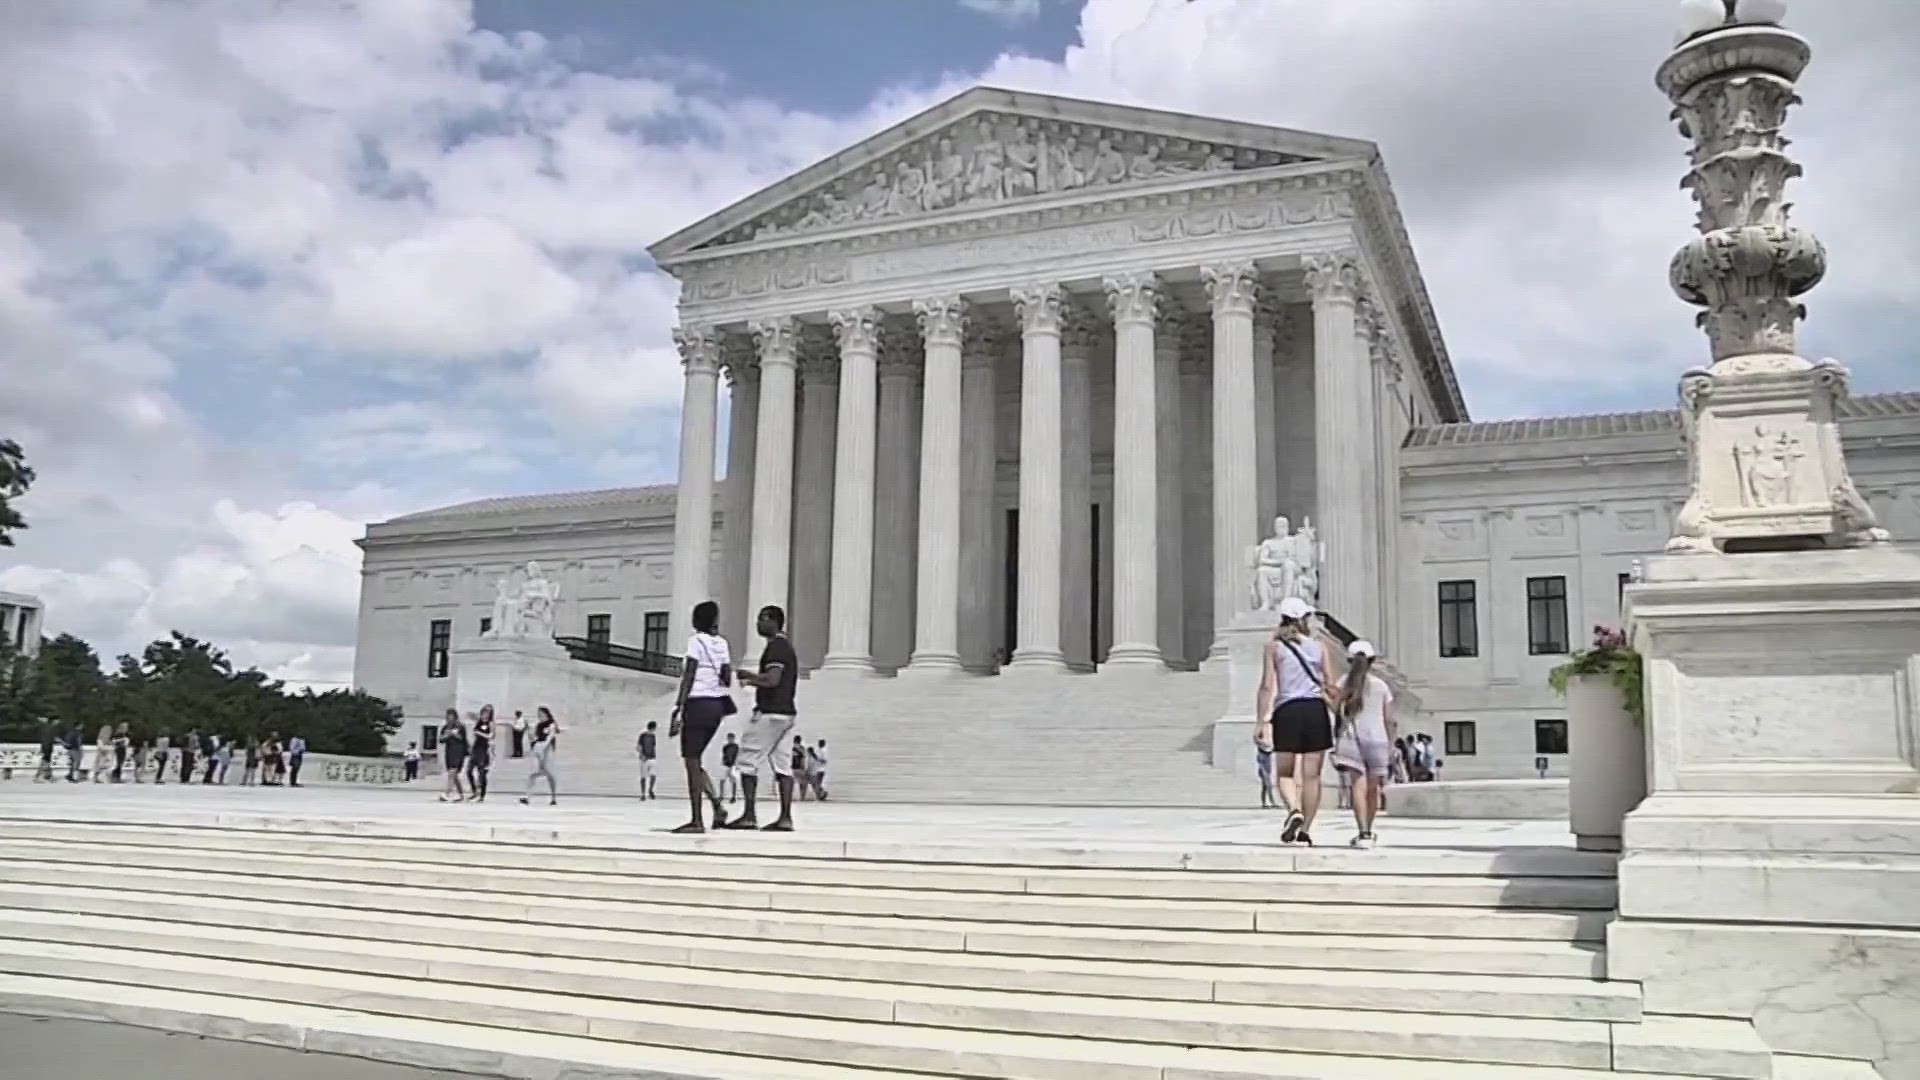 The Supreme Court case had been closely watched for its potential to weaken the landmark voting rights law.